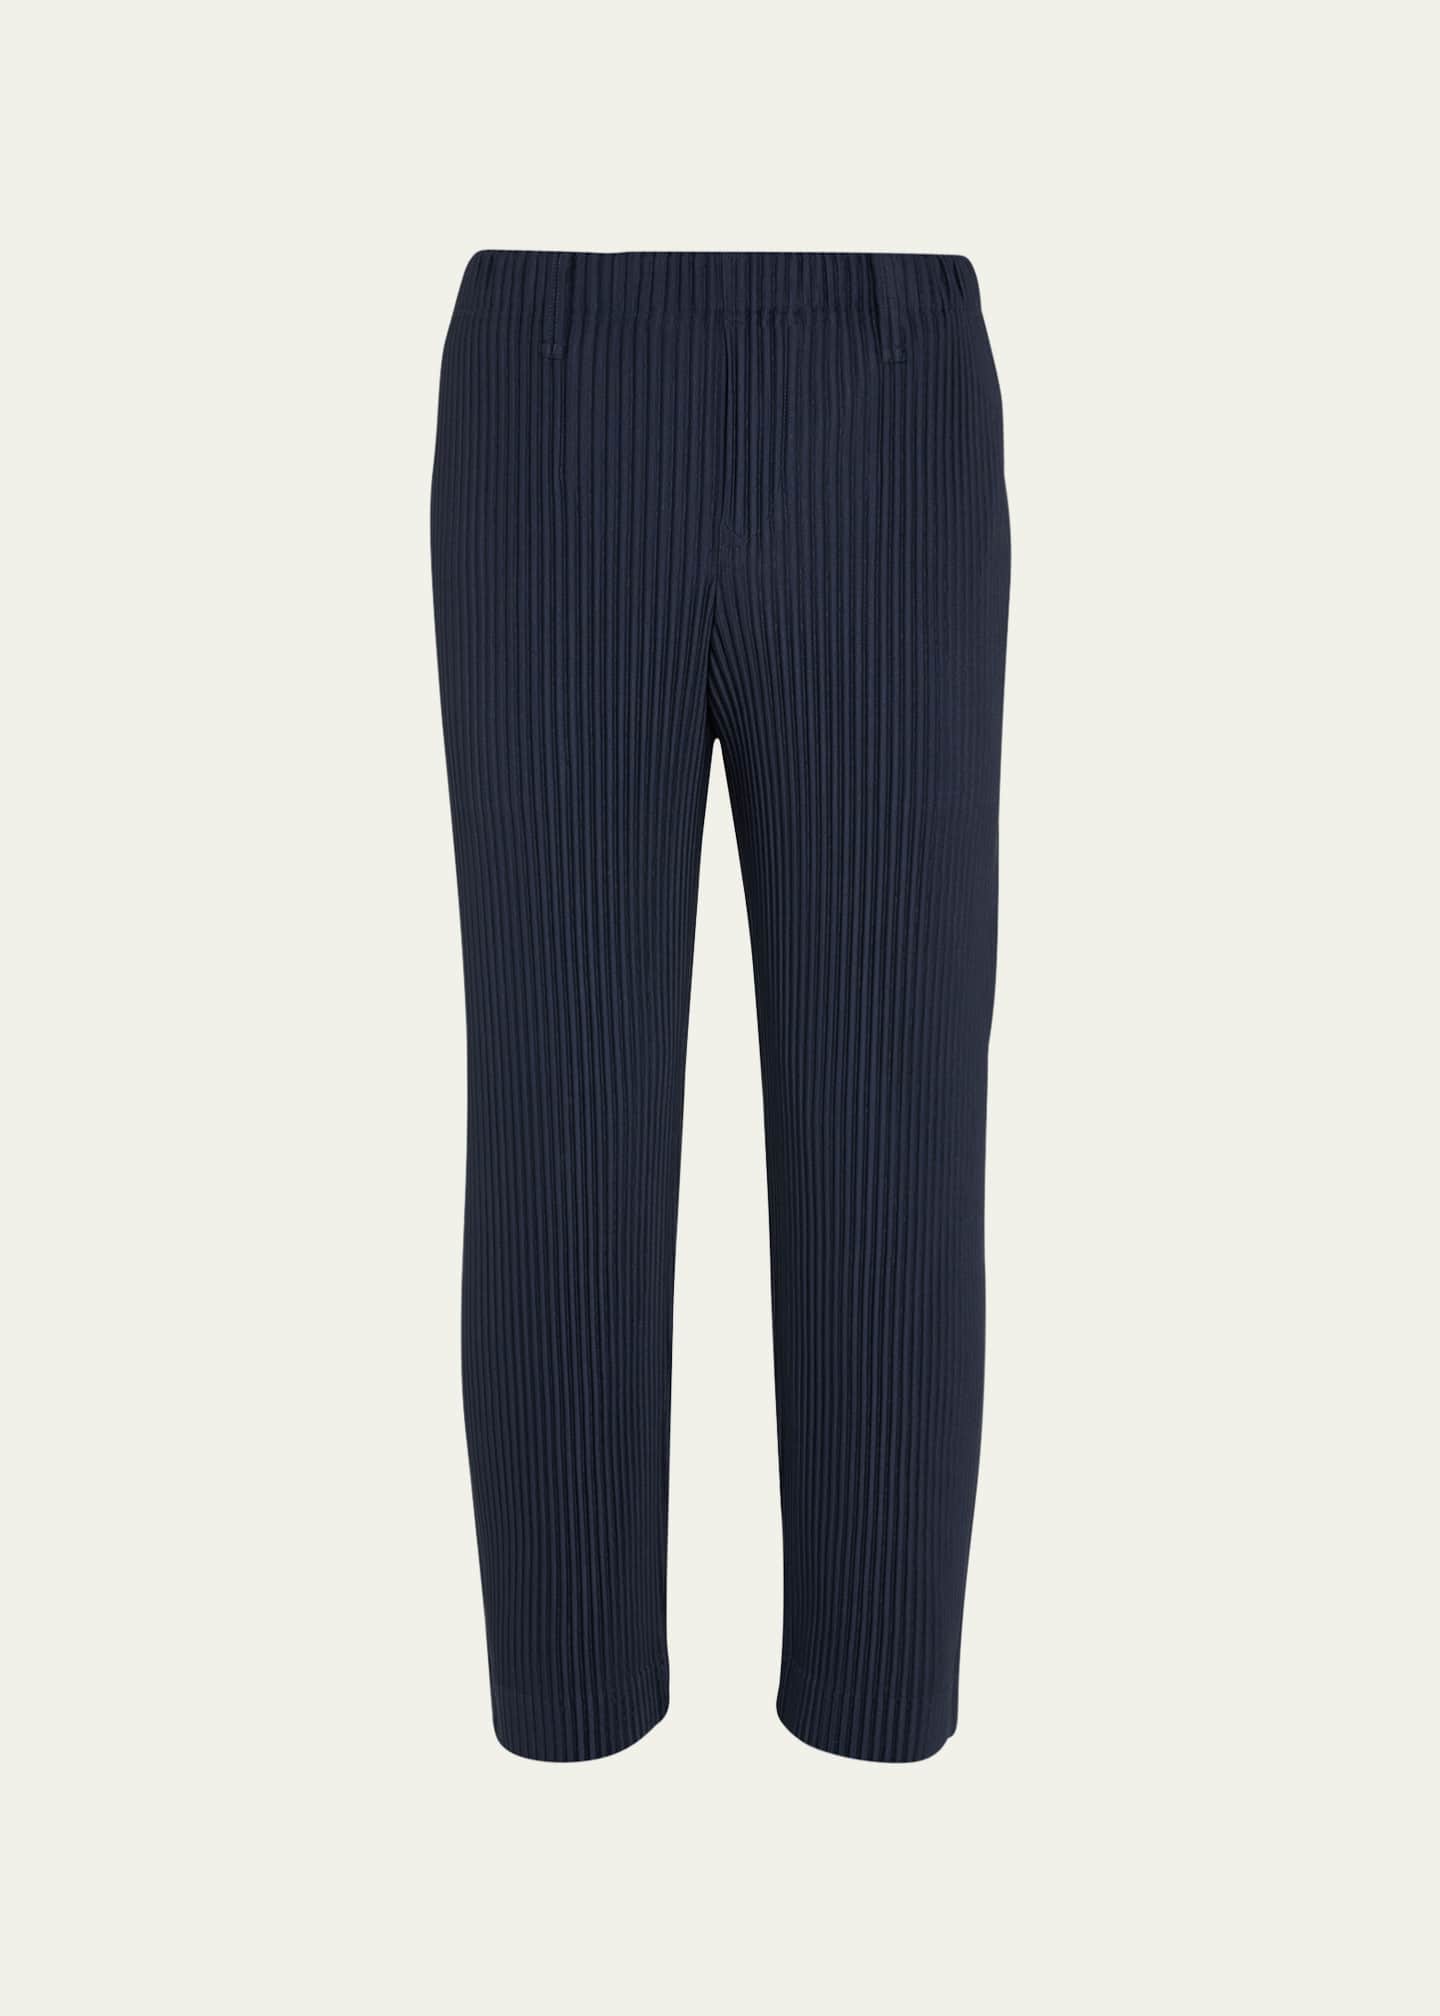 Homme Plisse Issey Miyake Men's Pleated Polyester Pants - Bergdorf ...